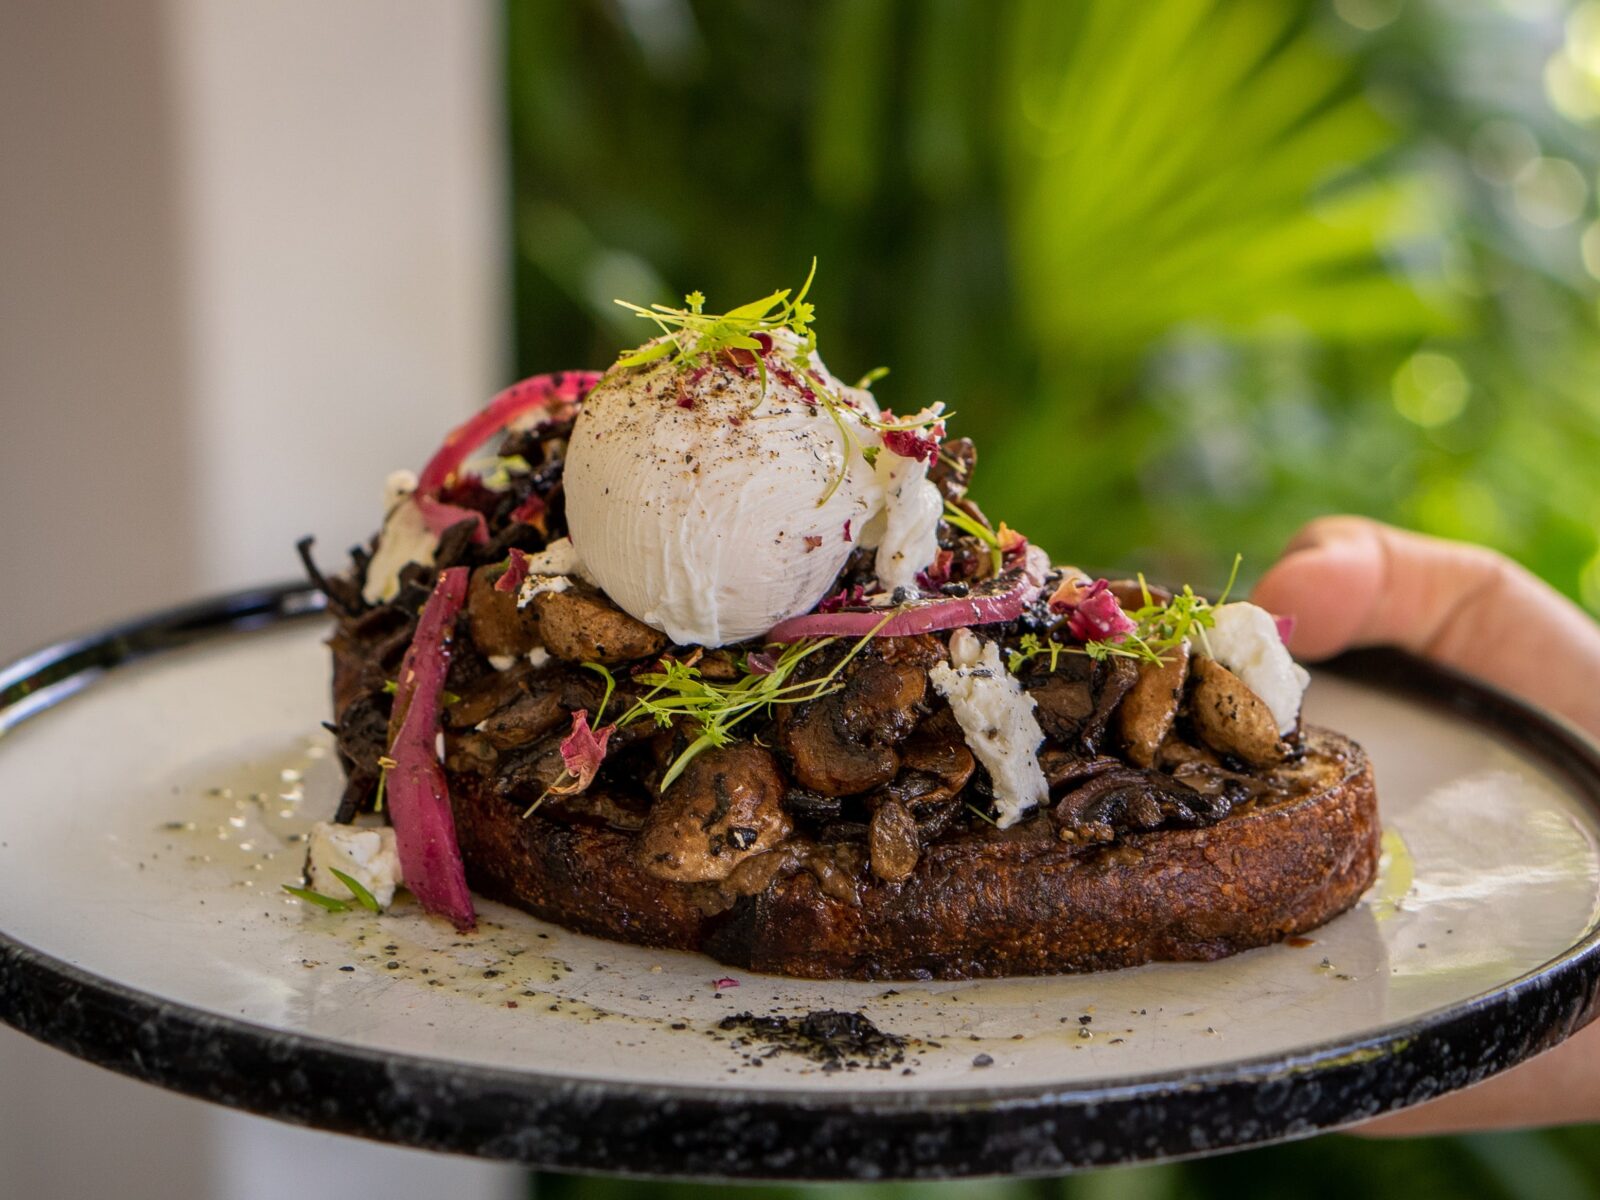 The Truffle Mushrooms dish is held up in front of greenery. Topped with a poached egg